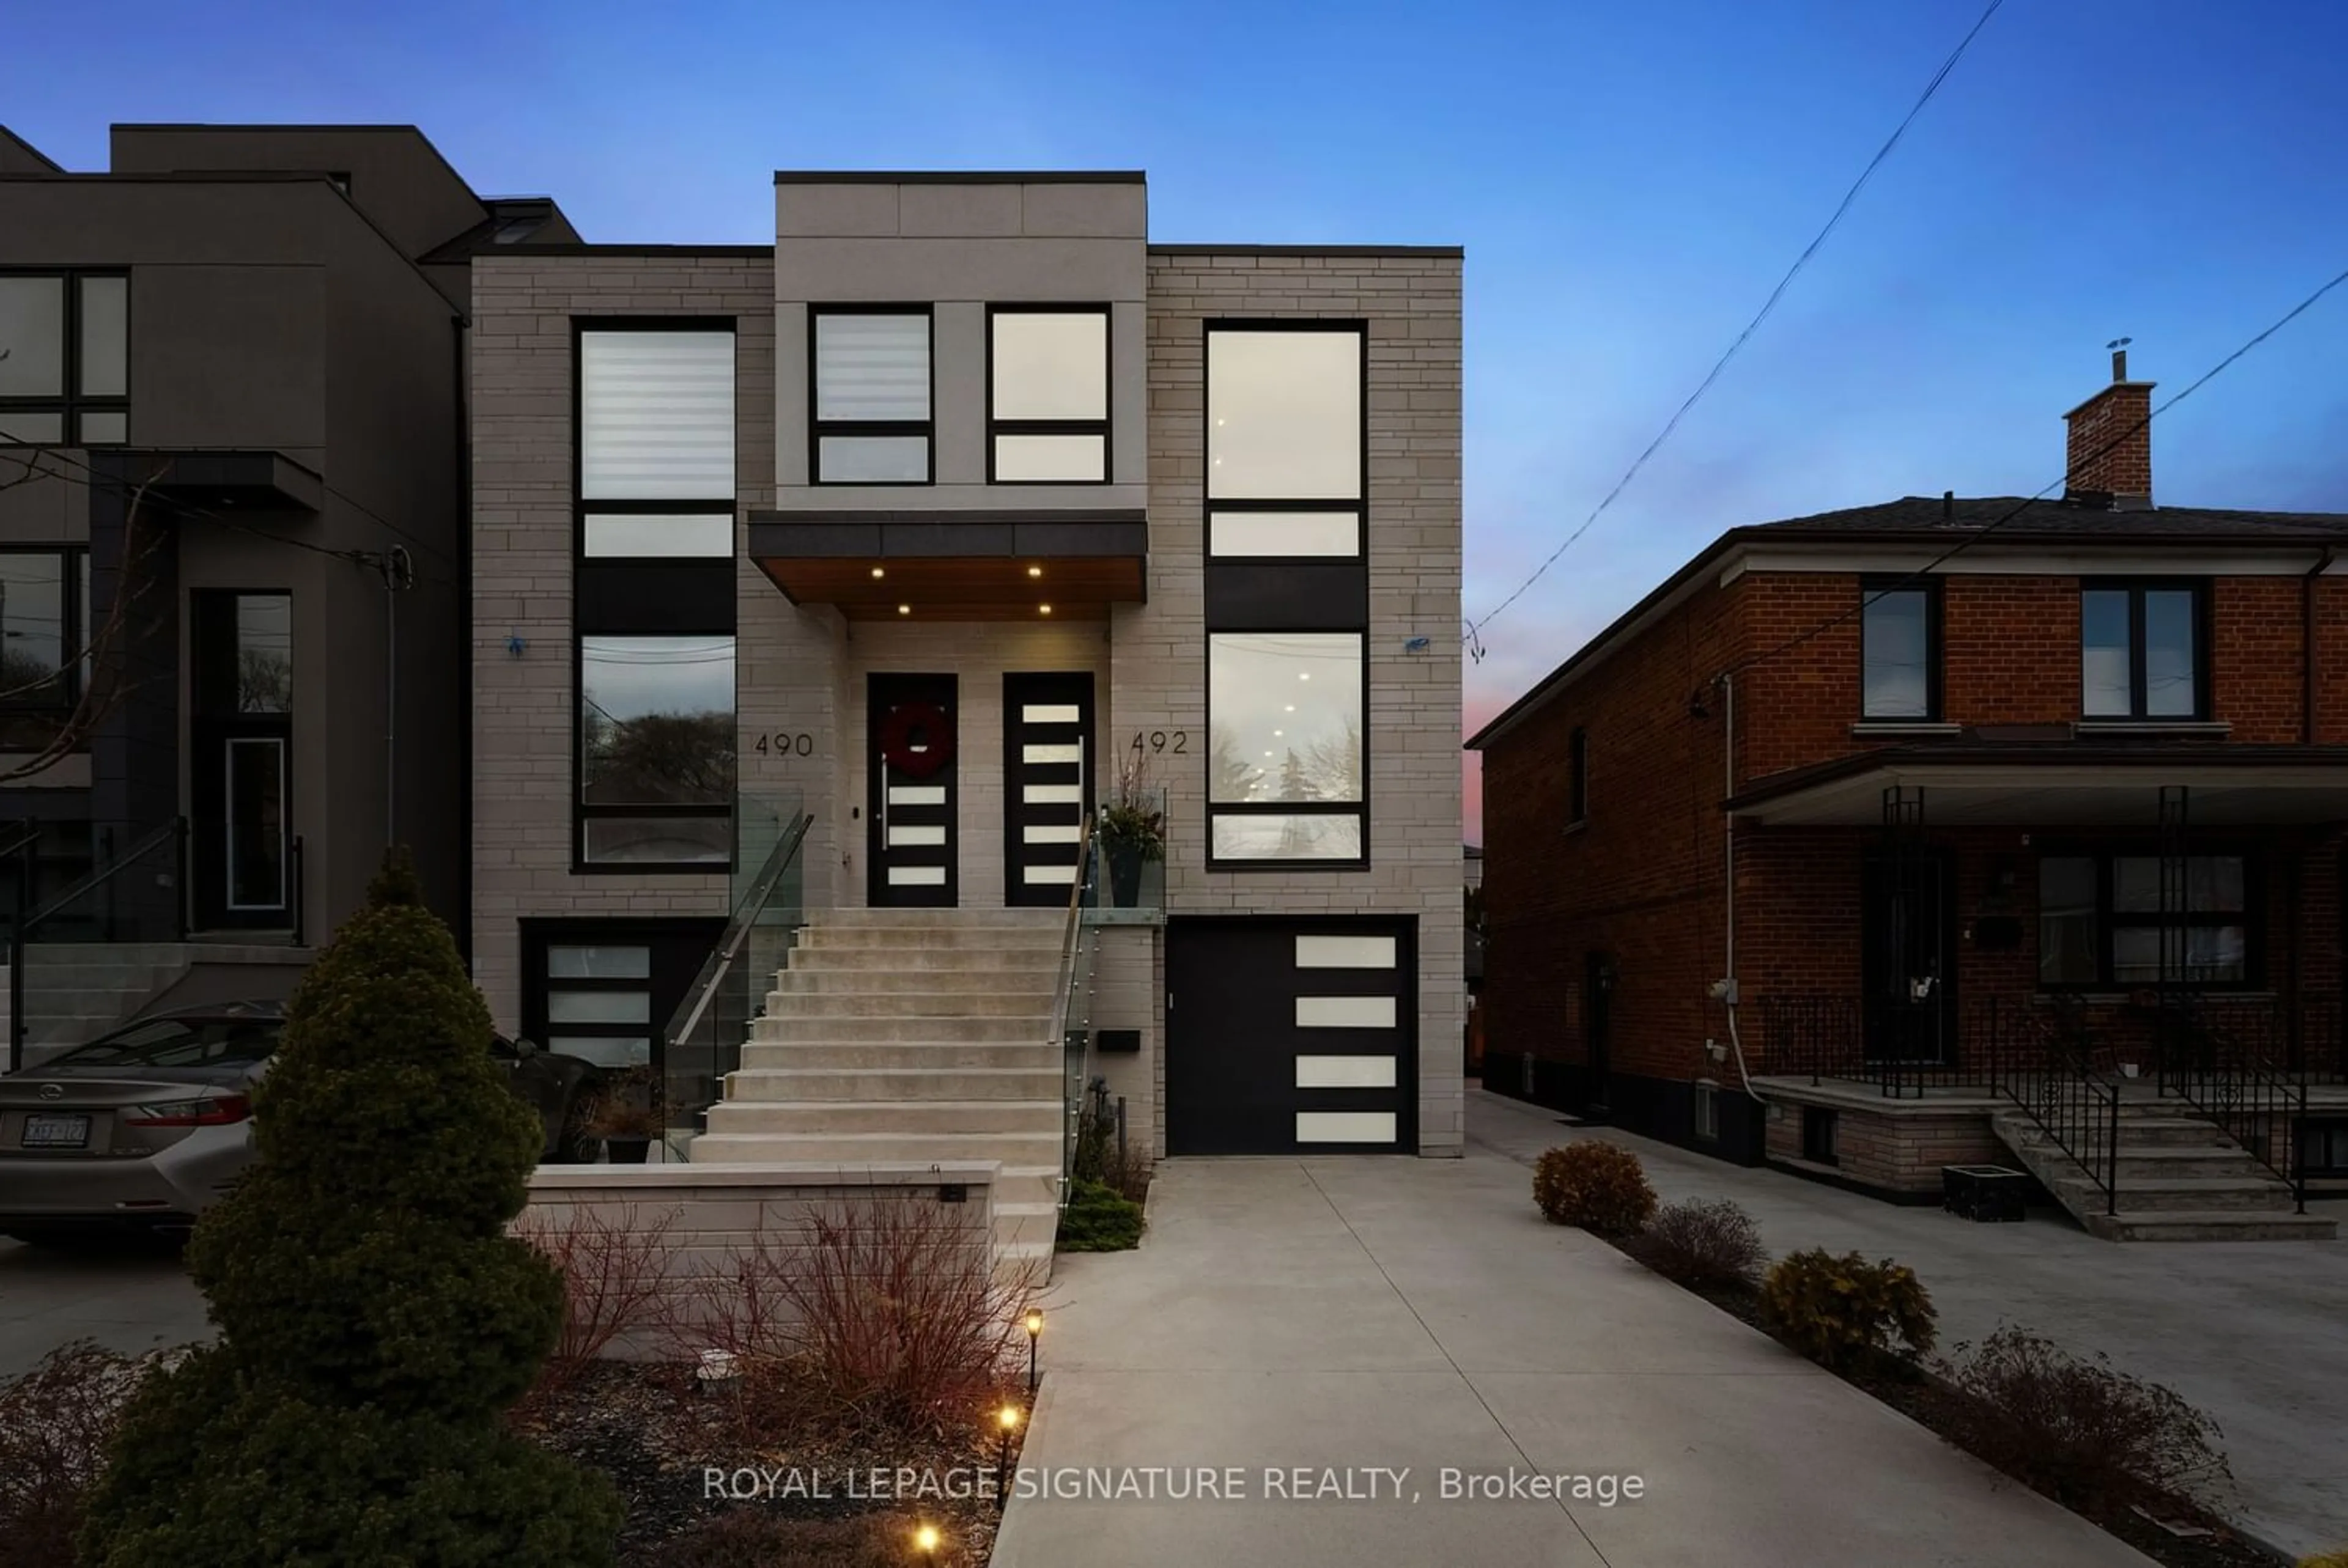 Home with unknown exterior material for 492 Mcroberts Ave, Toronto Ontario M6E 4R4